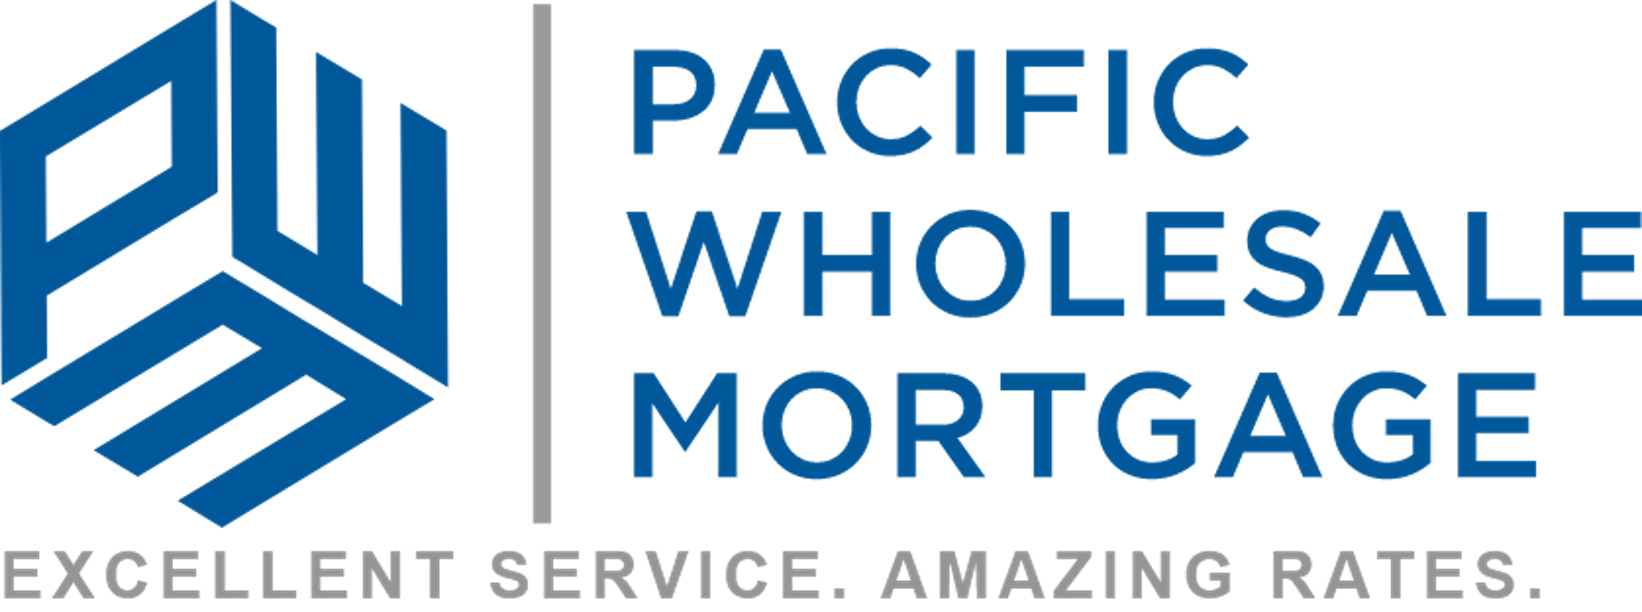 Pacific Wholesale Mortgage